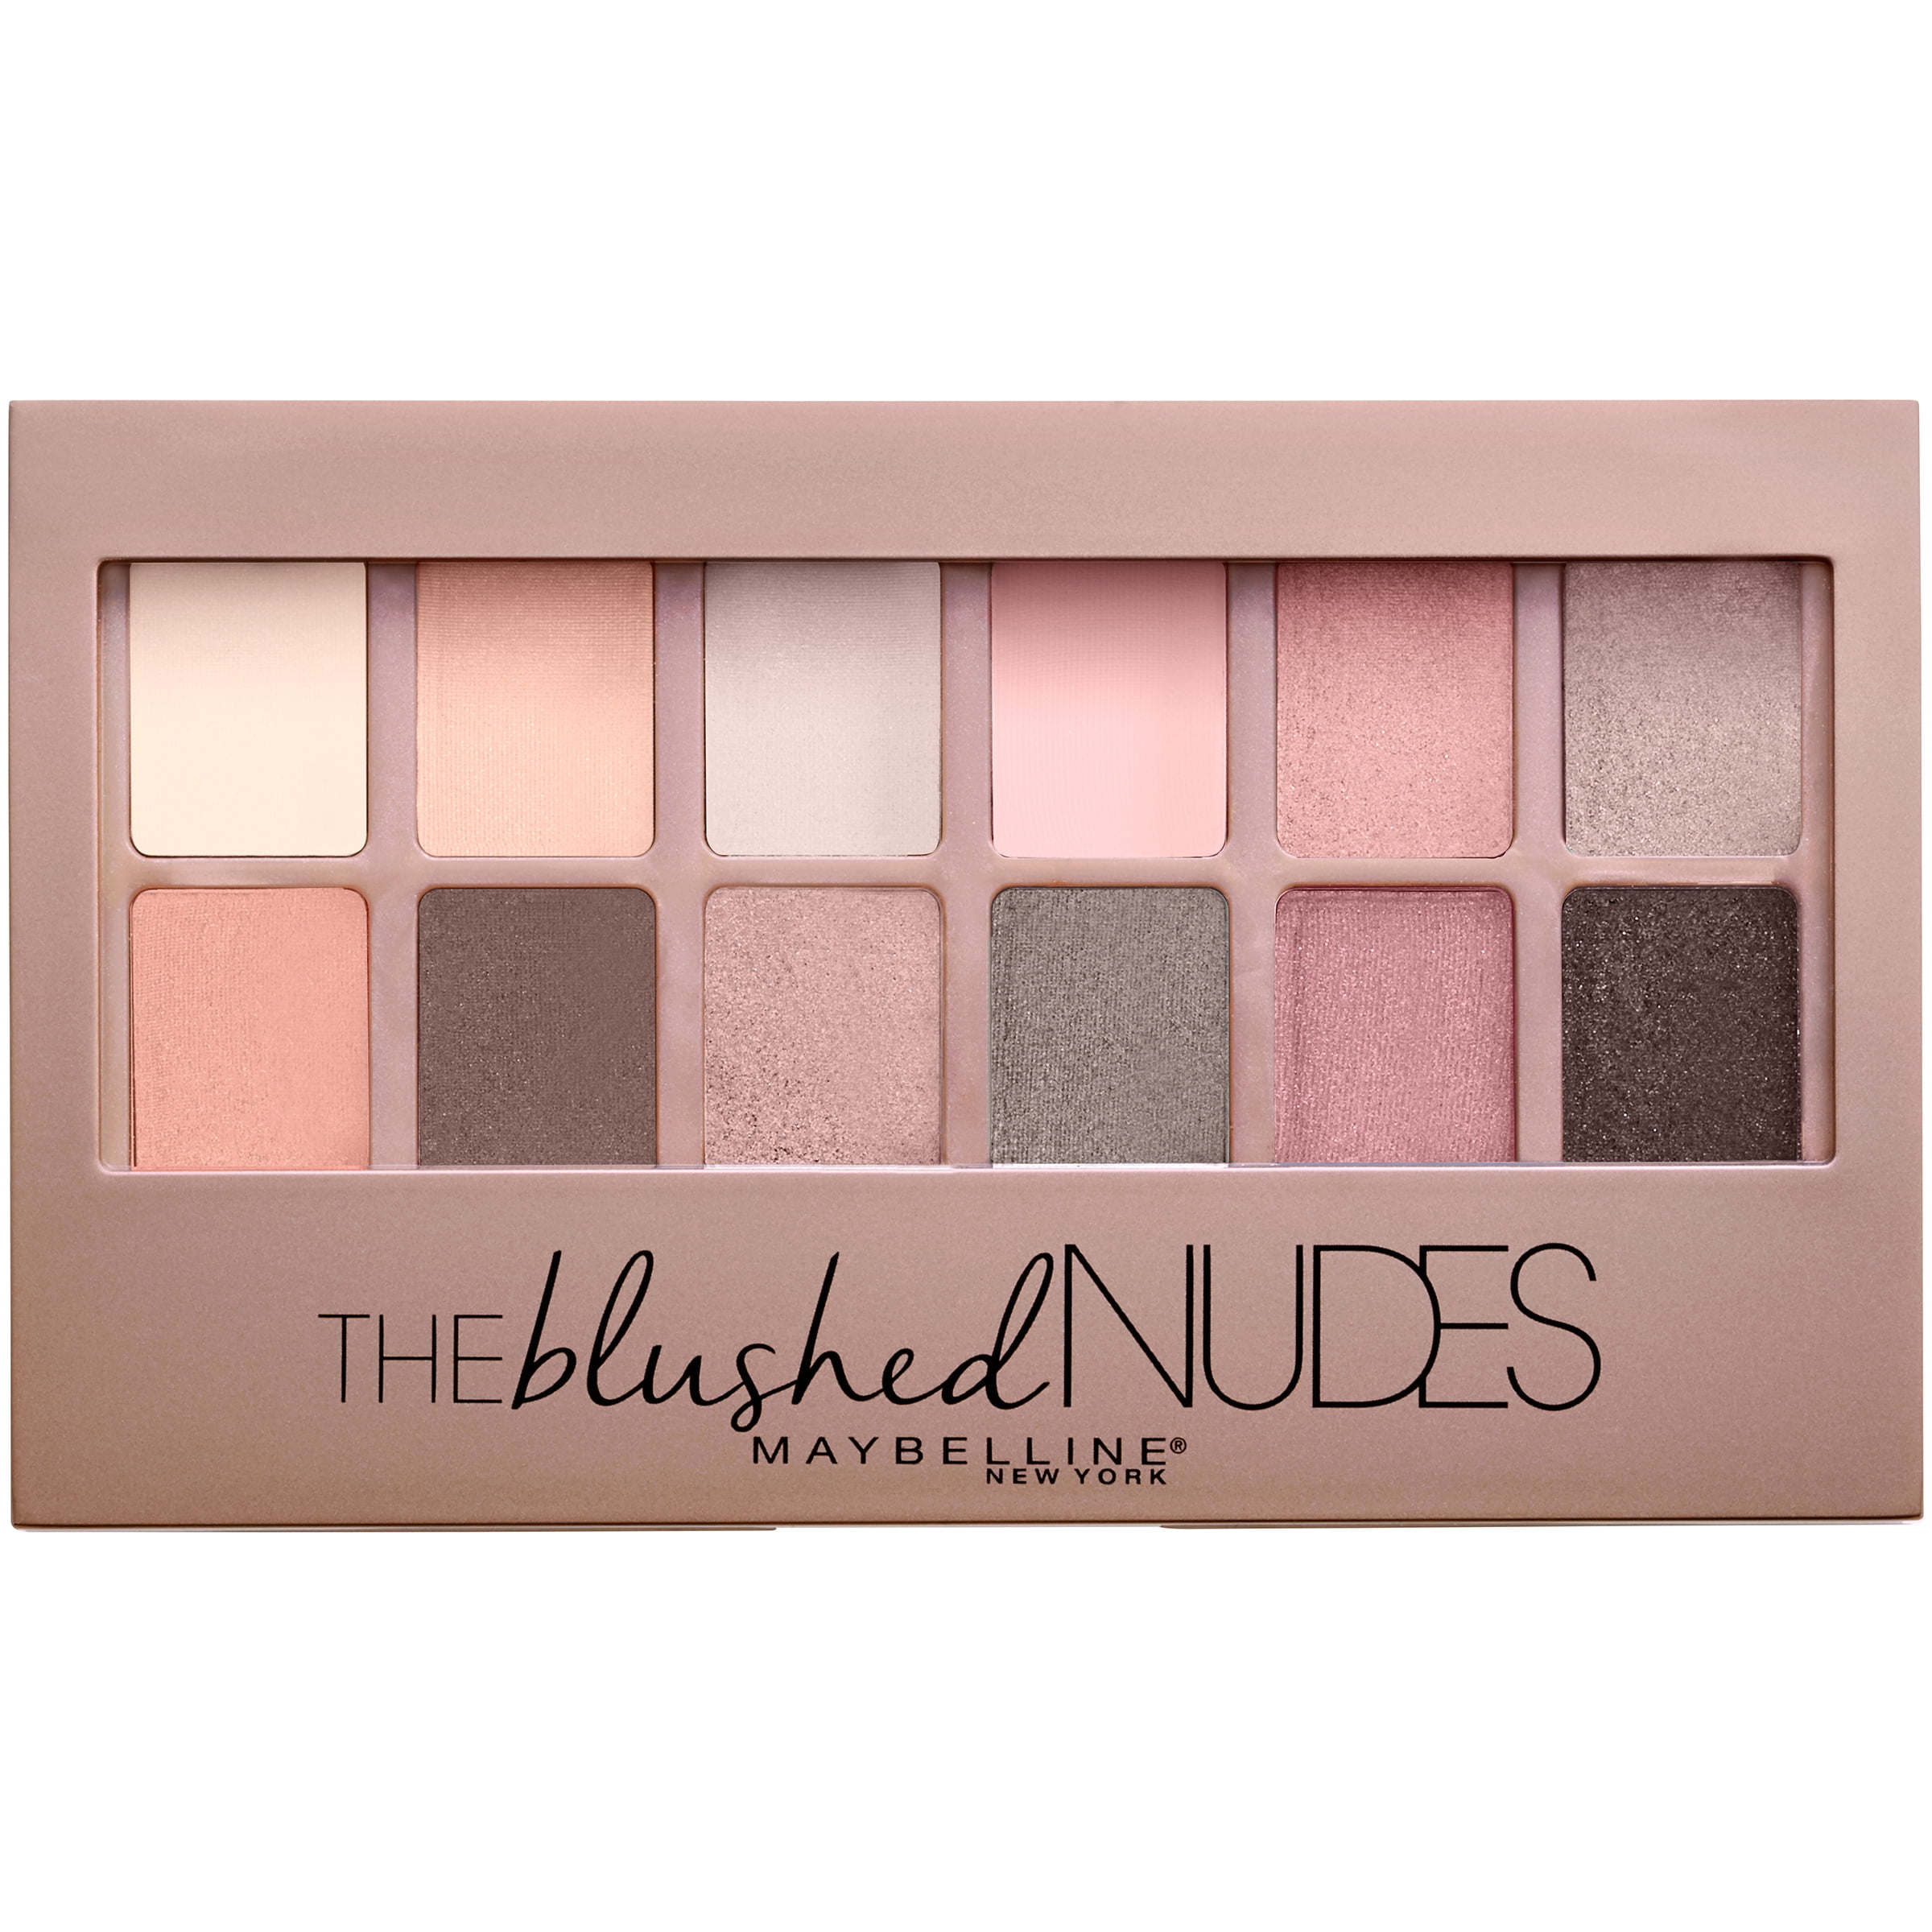 MAYBELLINE The Nudes Eye Shadow Palette - Barchin Cosmetics